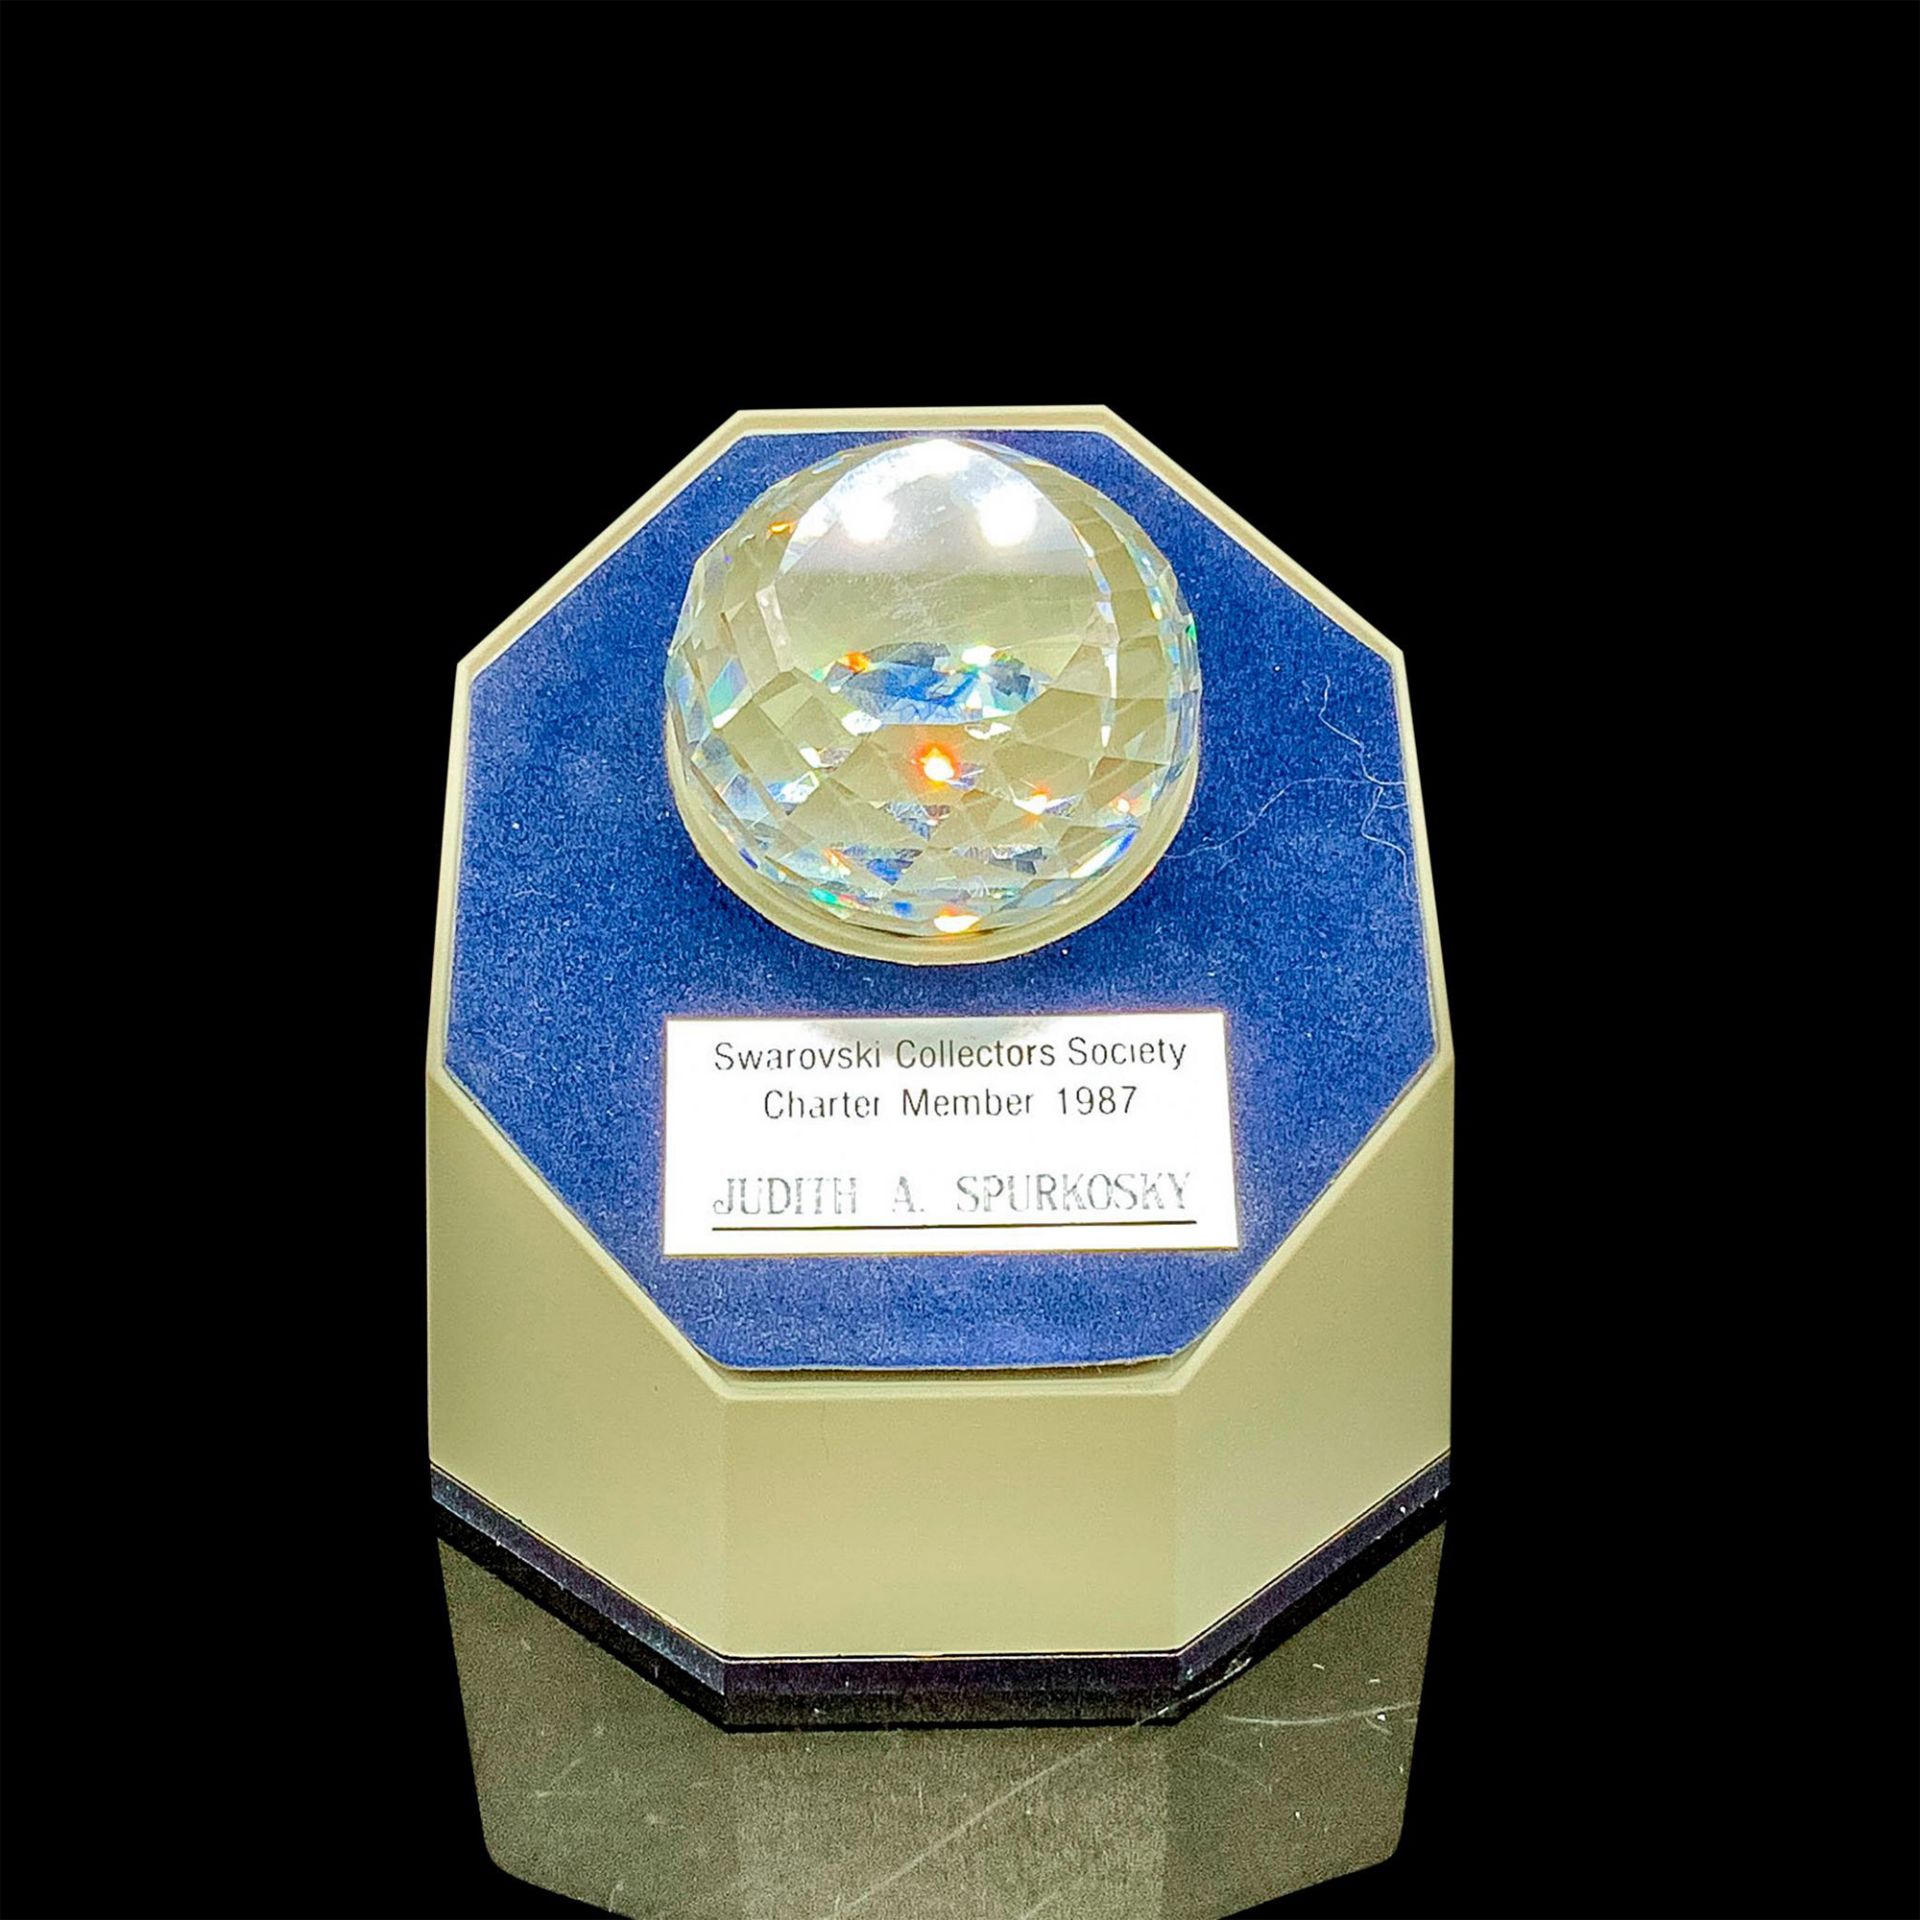 Swarovski SCS 1987 Charter Member Paperweight and Stand